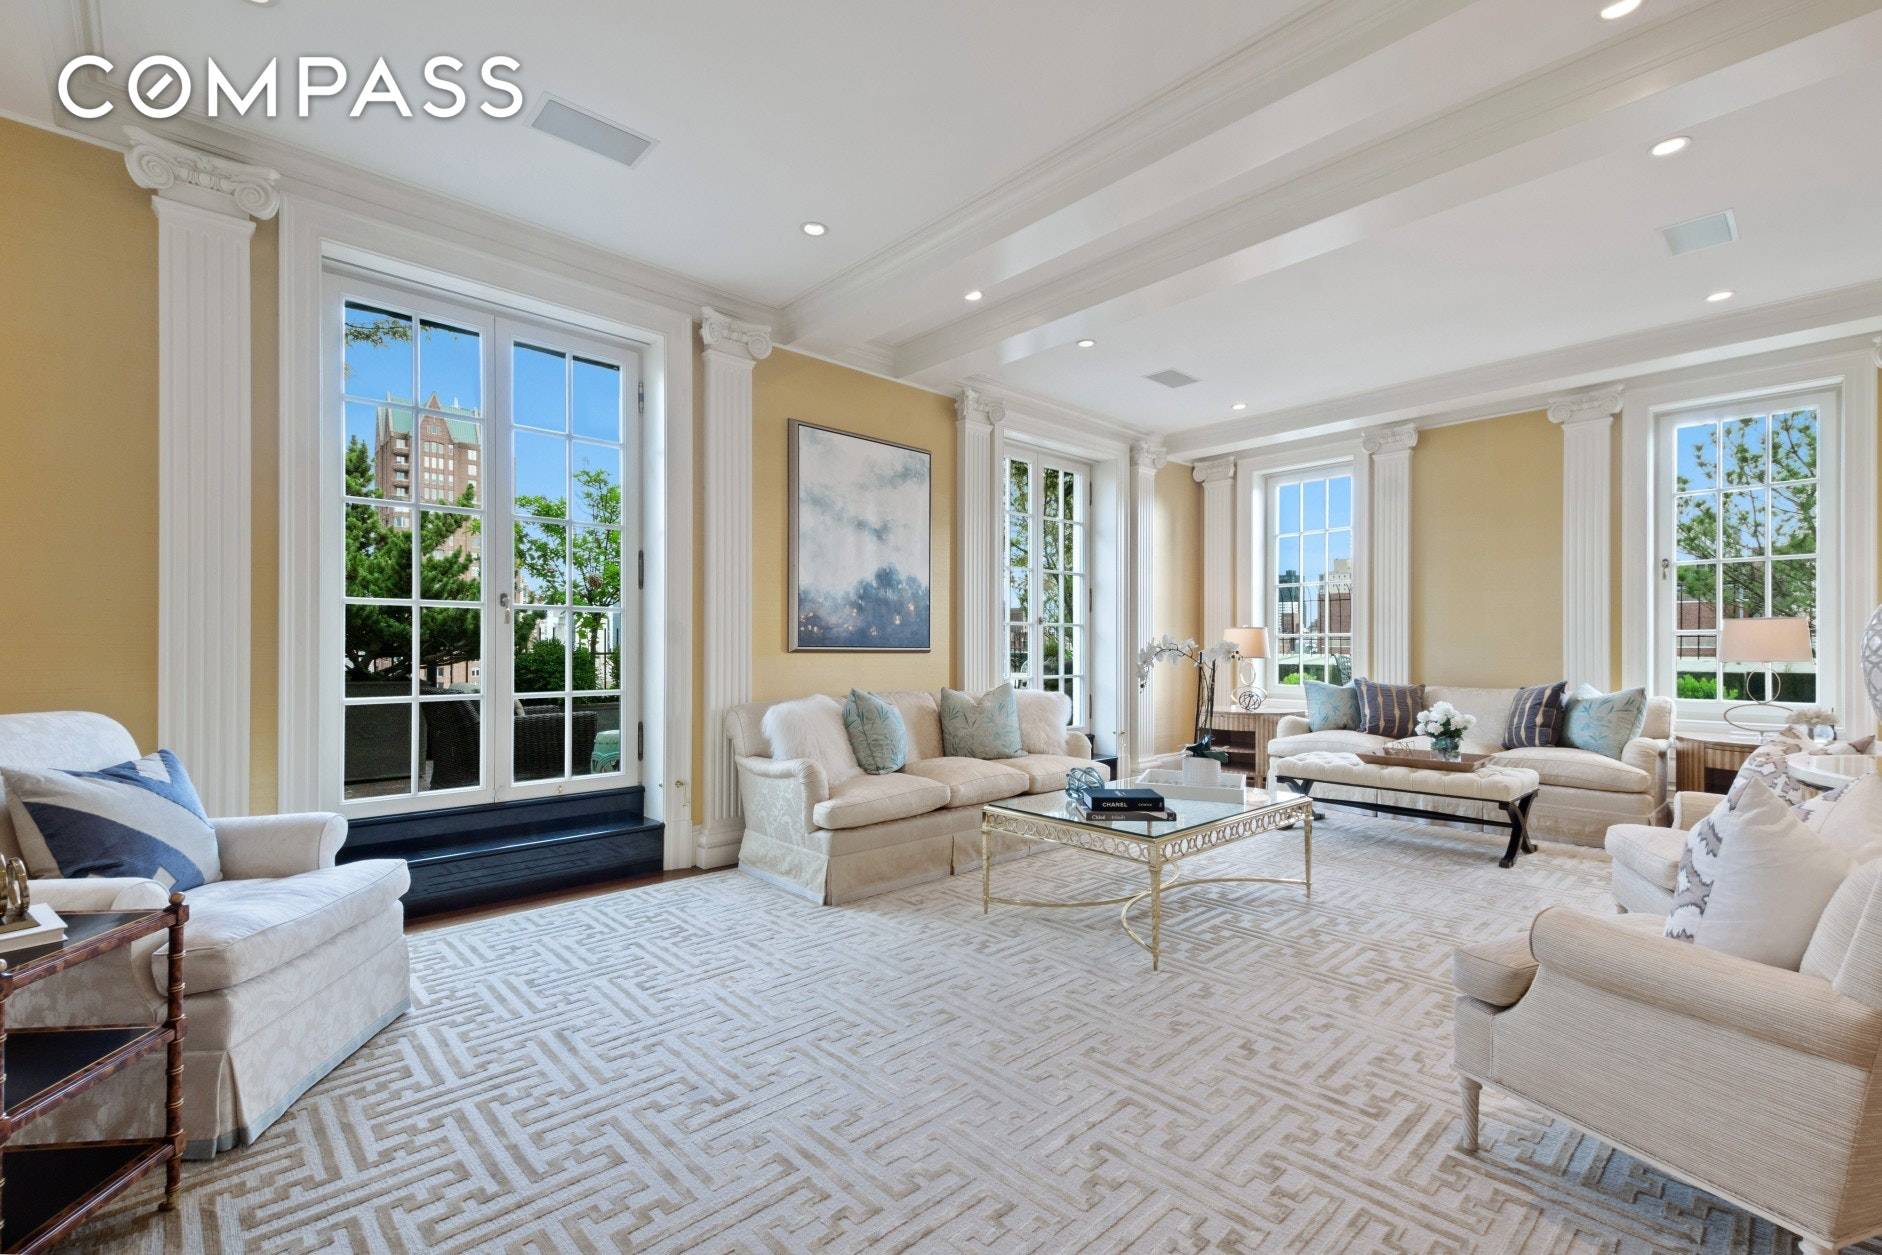 Terraced Penthouse Perfection This elegant penthouse residence is truly magical with its stunning details and is a brilliantly lit interior with wrap terraces in one of Park Avenue s most ...